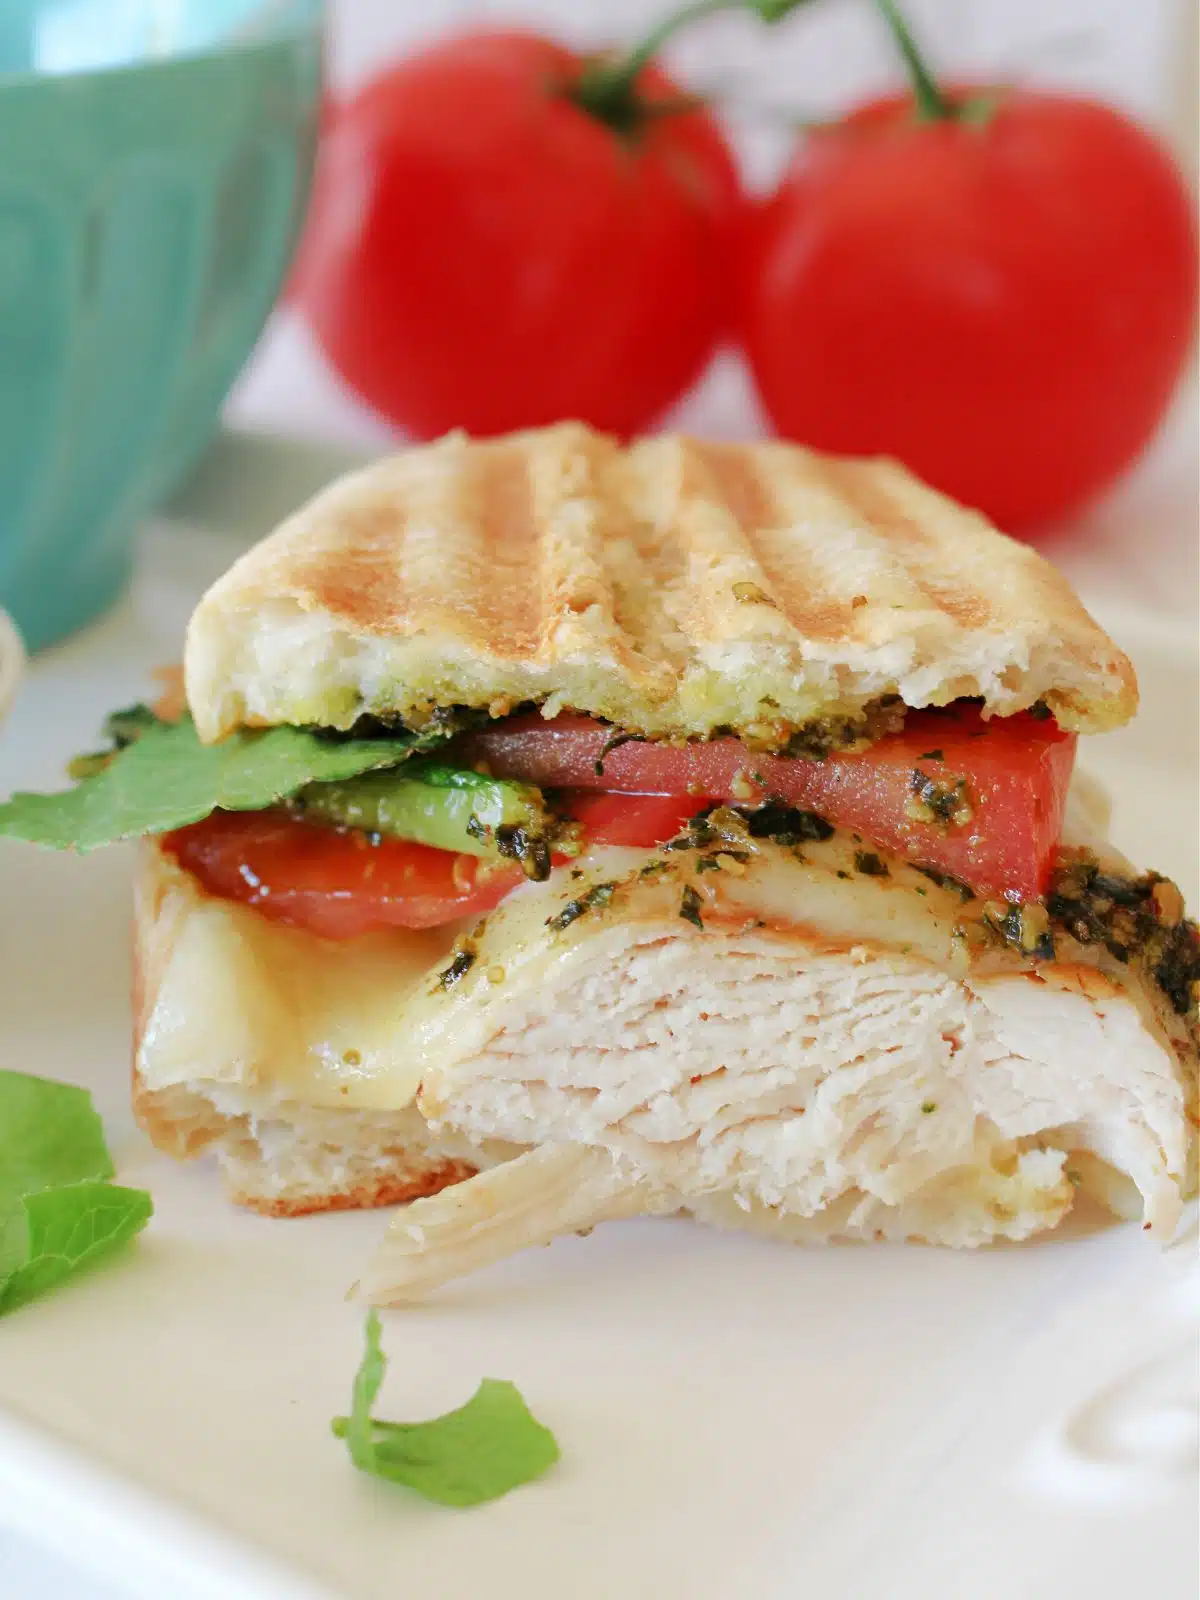 Close up of the chicken cutlet sandwich with whole tomatoes in the background.